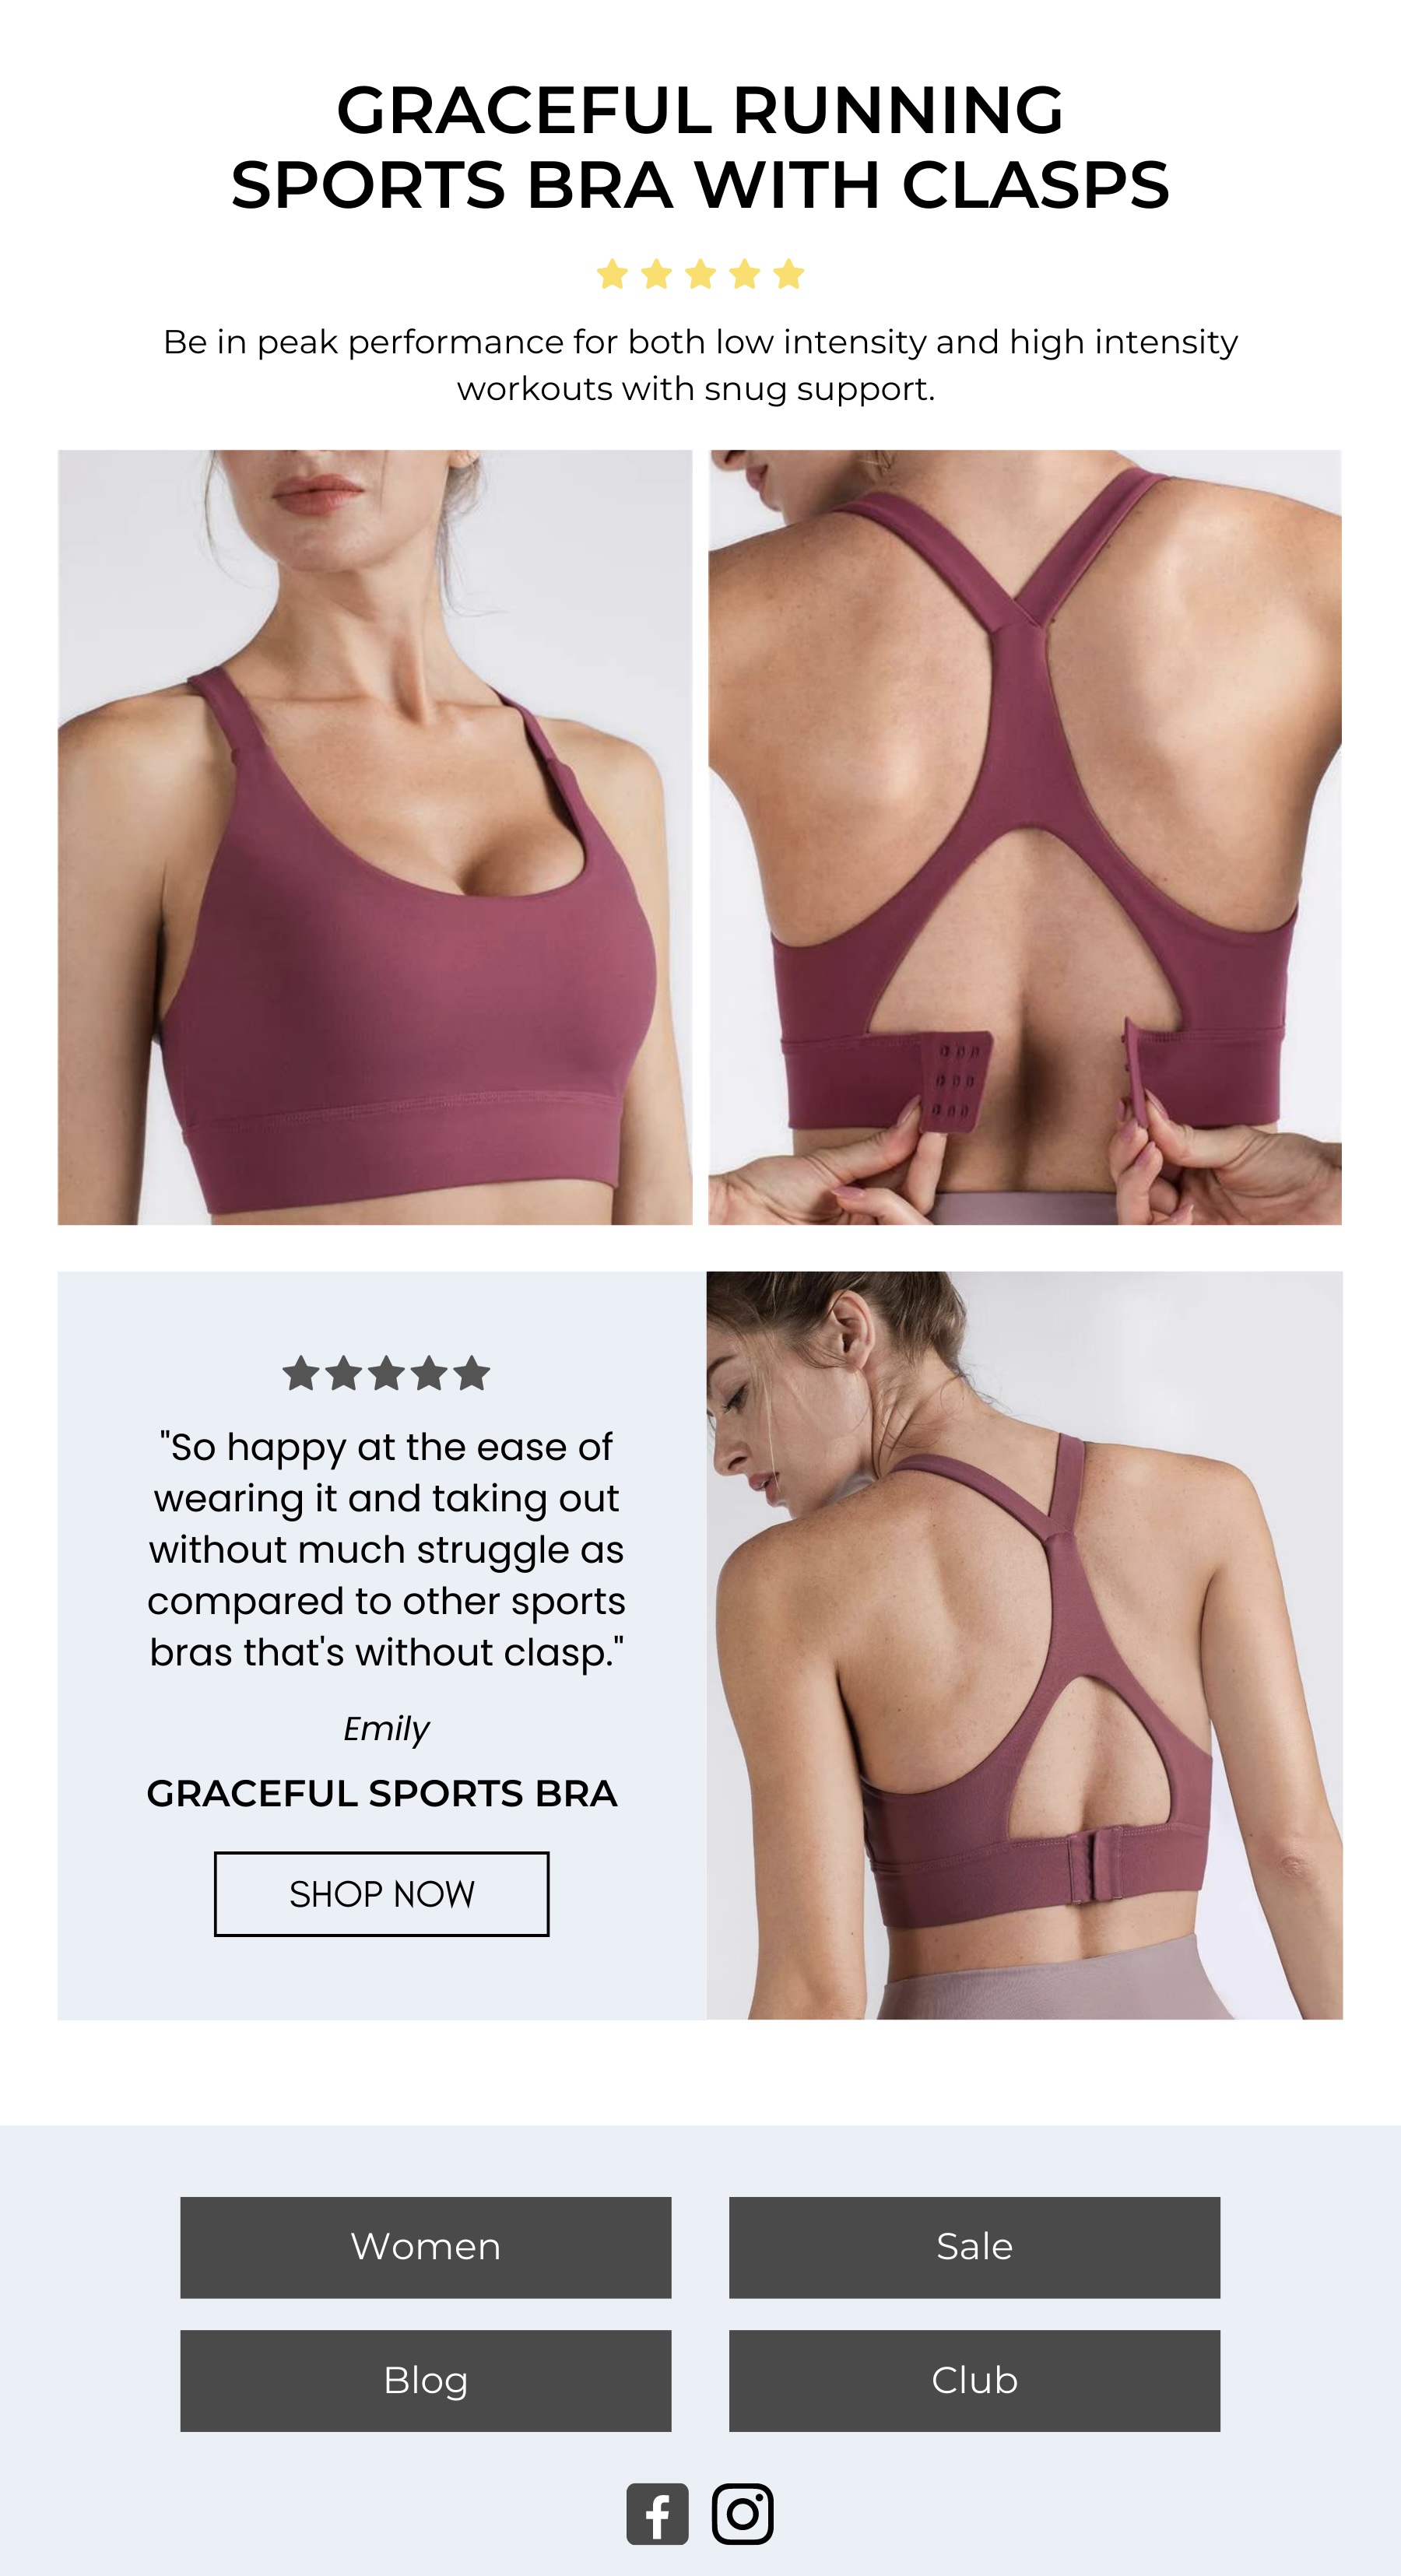 GEAR UP: THE TOP 4 BESTSELLING BRAS ARE RESTOCKED - Gym Wear Movement